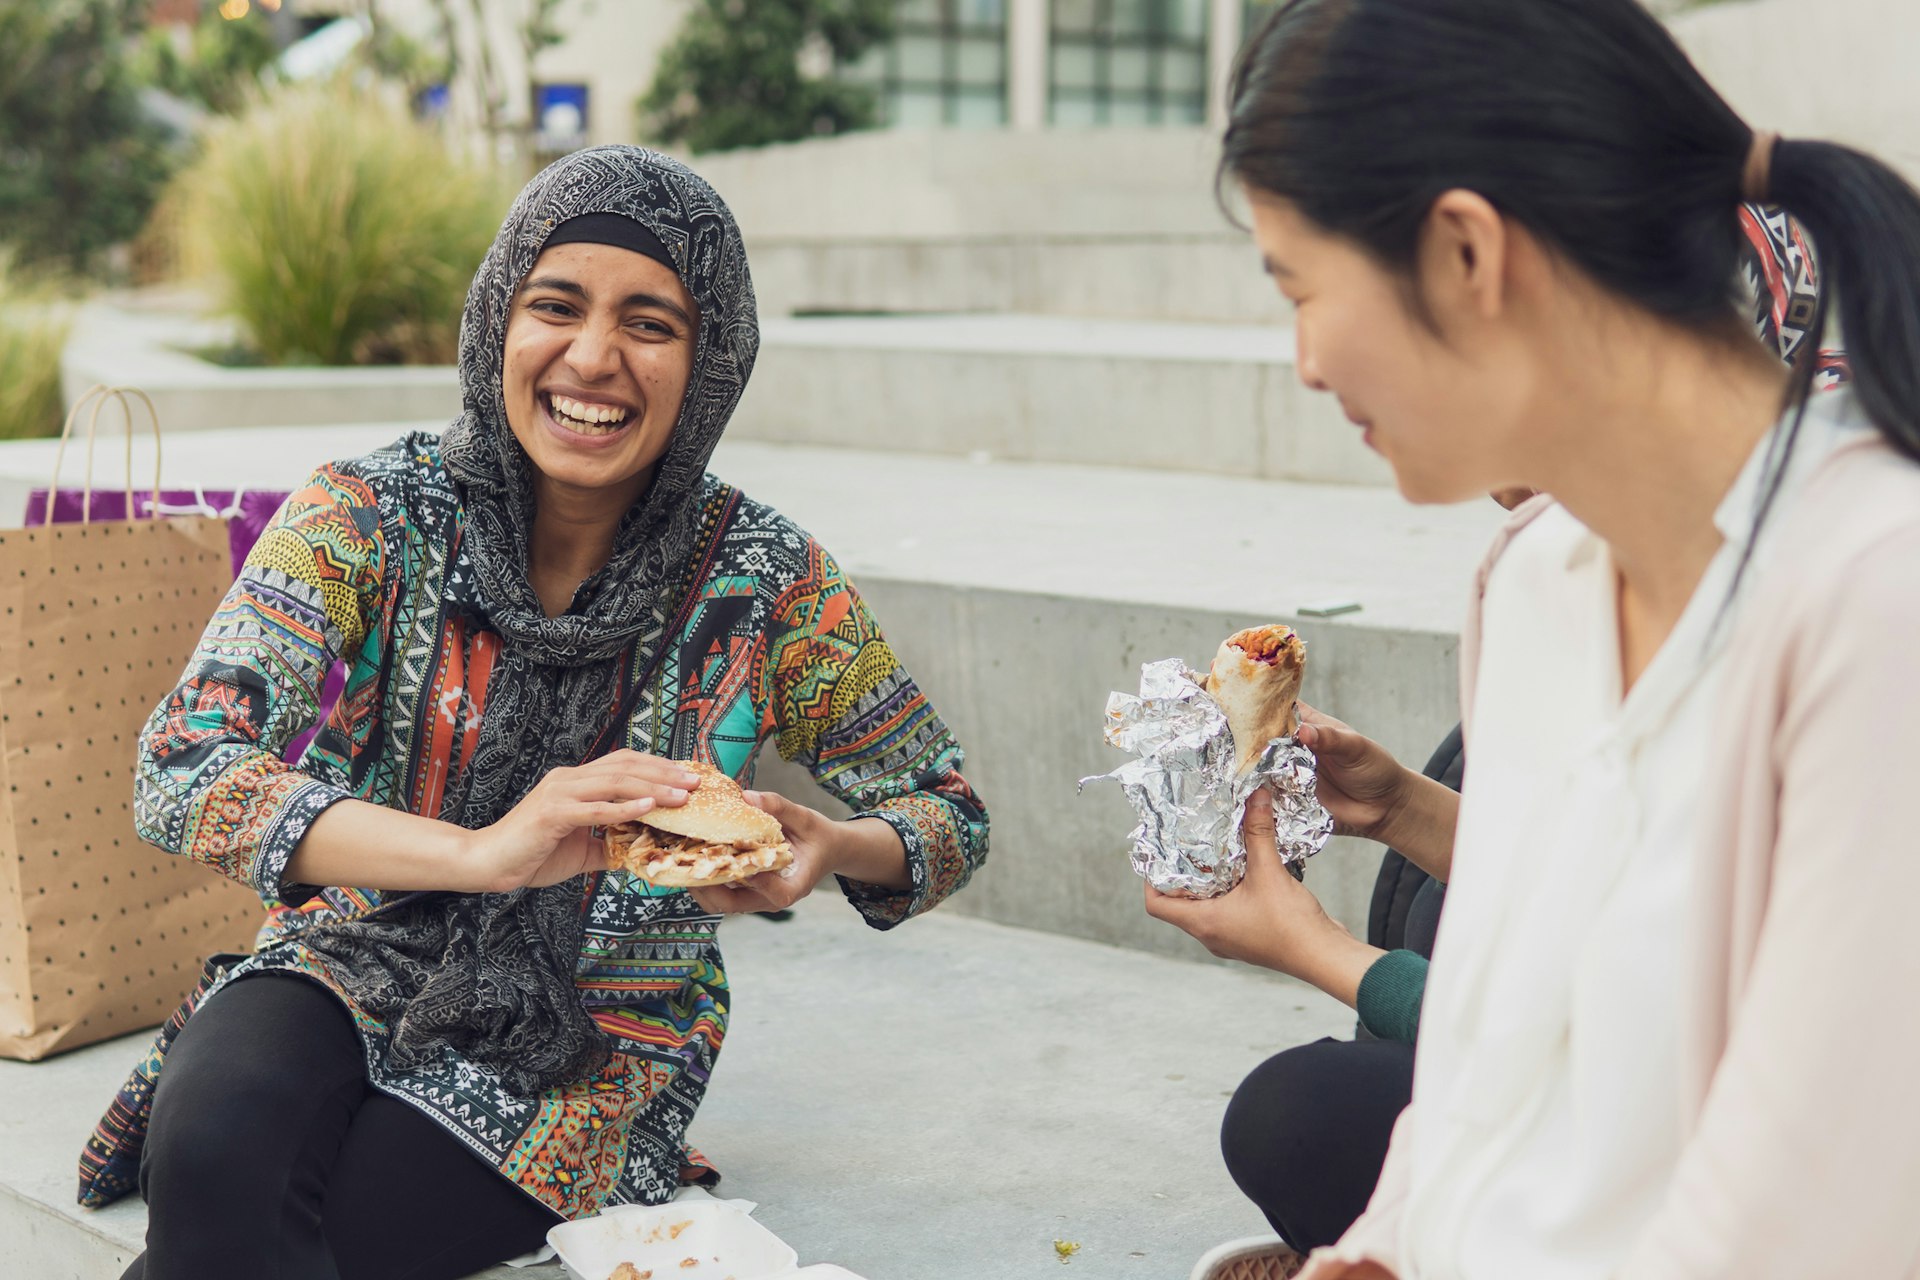 A candid photograph of a Gen Z Muslim woman laughing with friends while out shopping and having a bite to eat in the city.